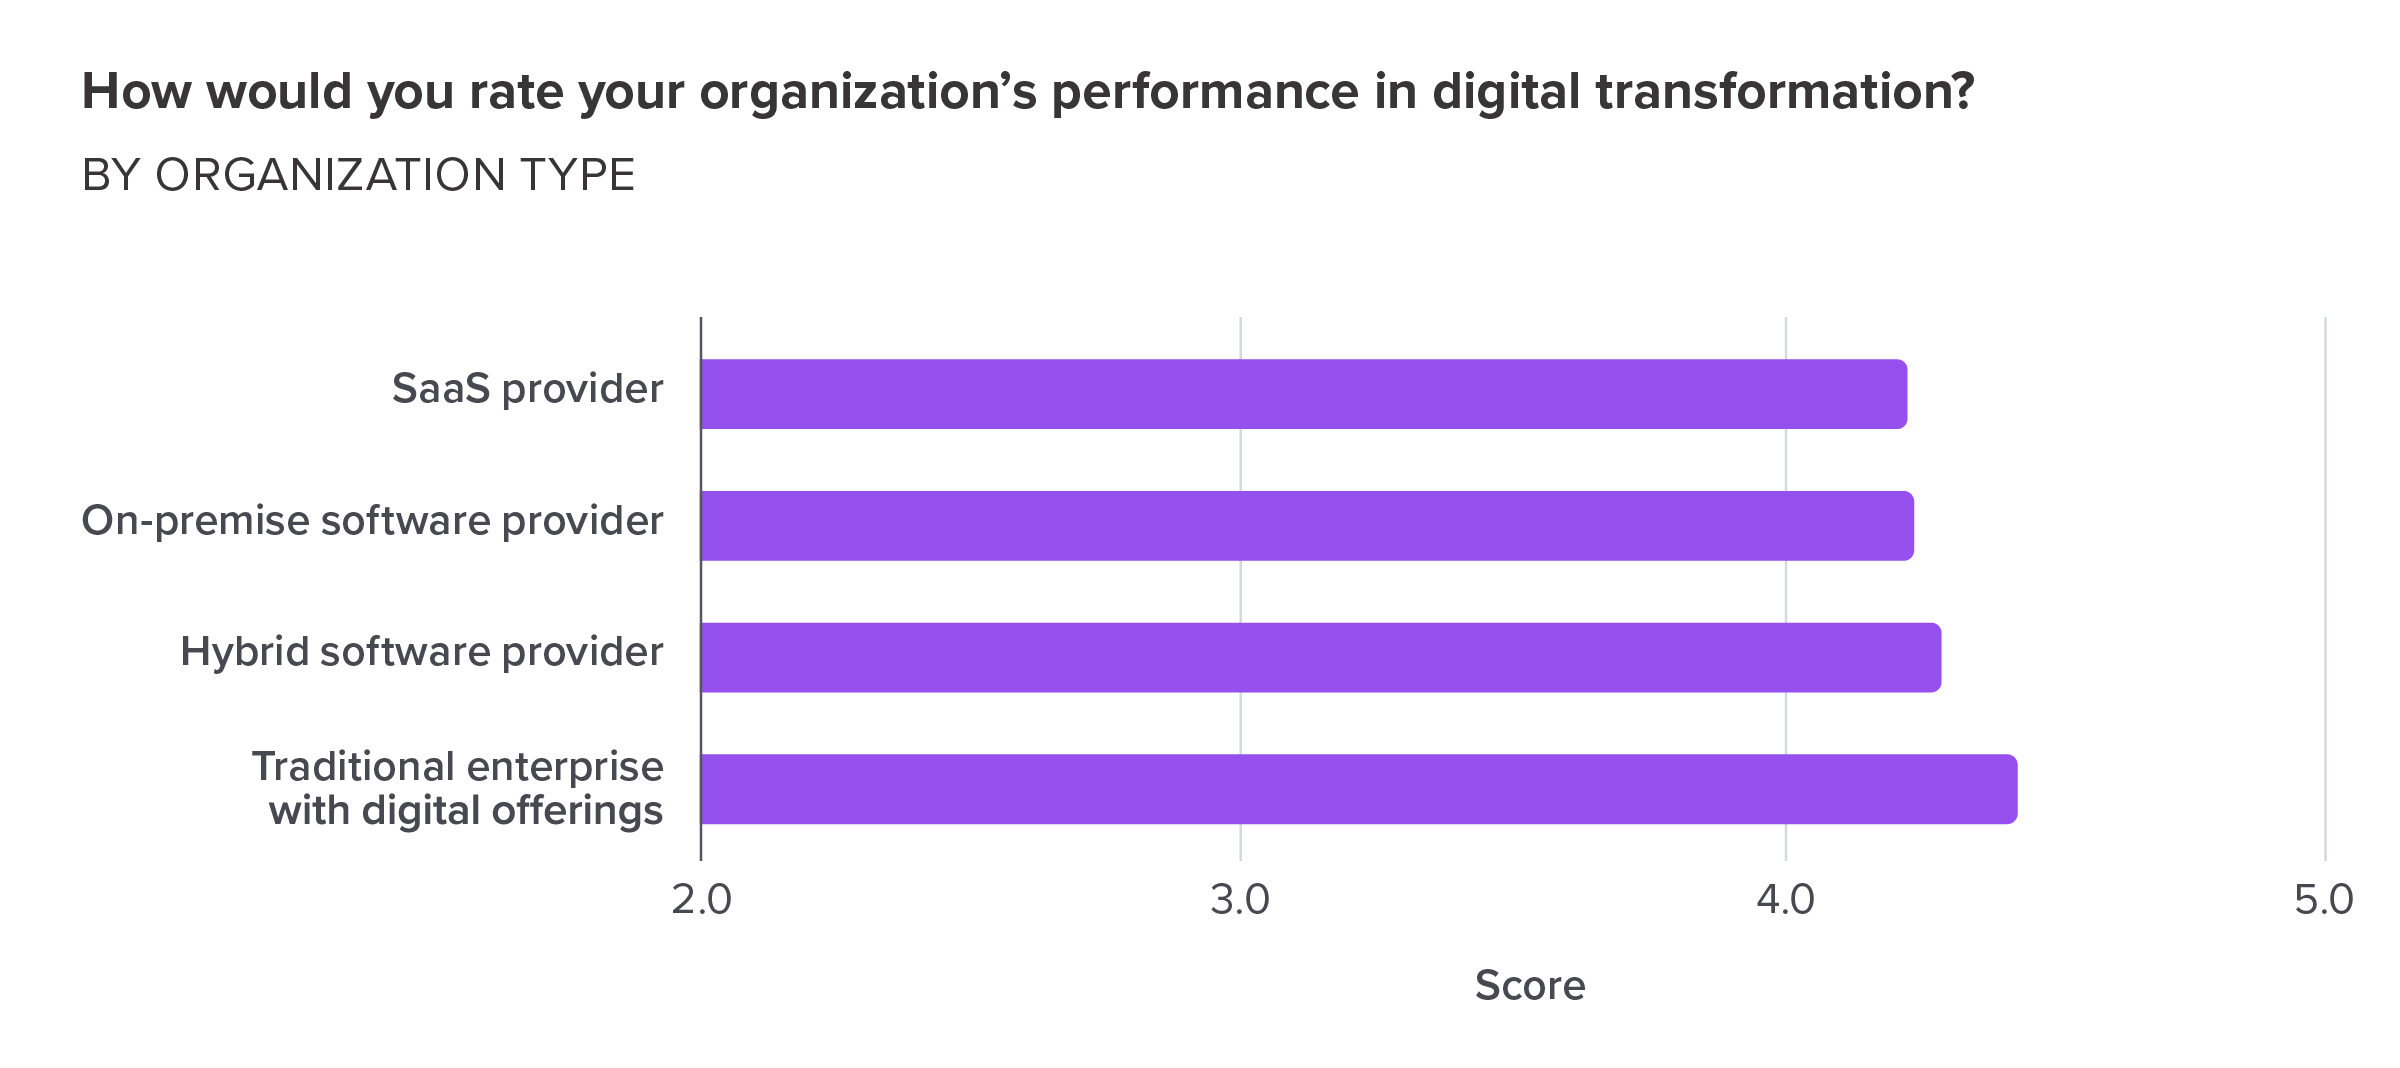 How would you rate your organization’s performance in digital transformation? By organization type